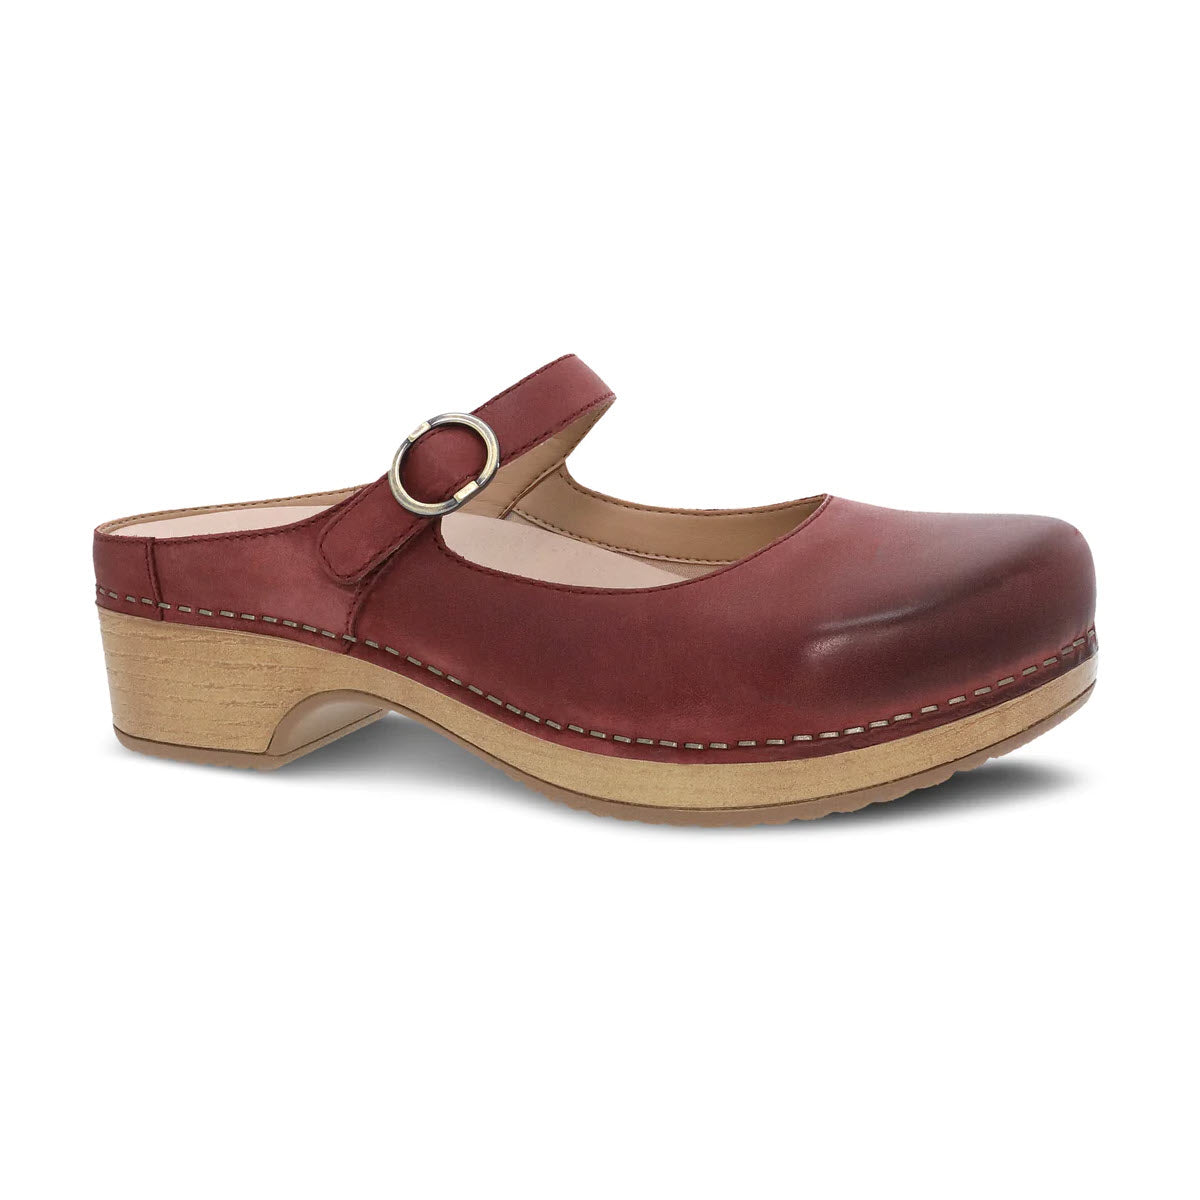 A single red leather Dansko Bria Cinnabar Mary Jane clog with an ankle strap and a wooden heel, isolated on a white background.